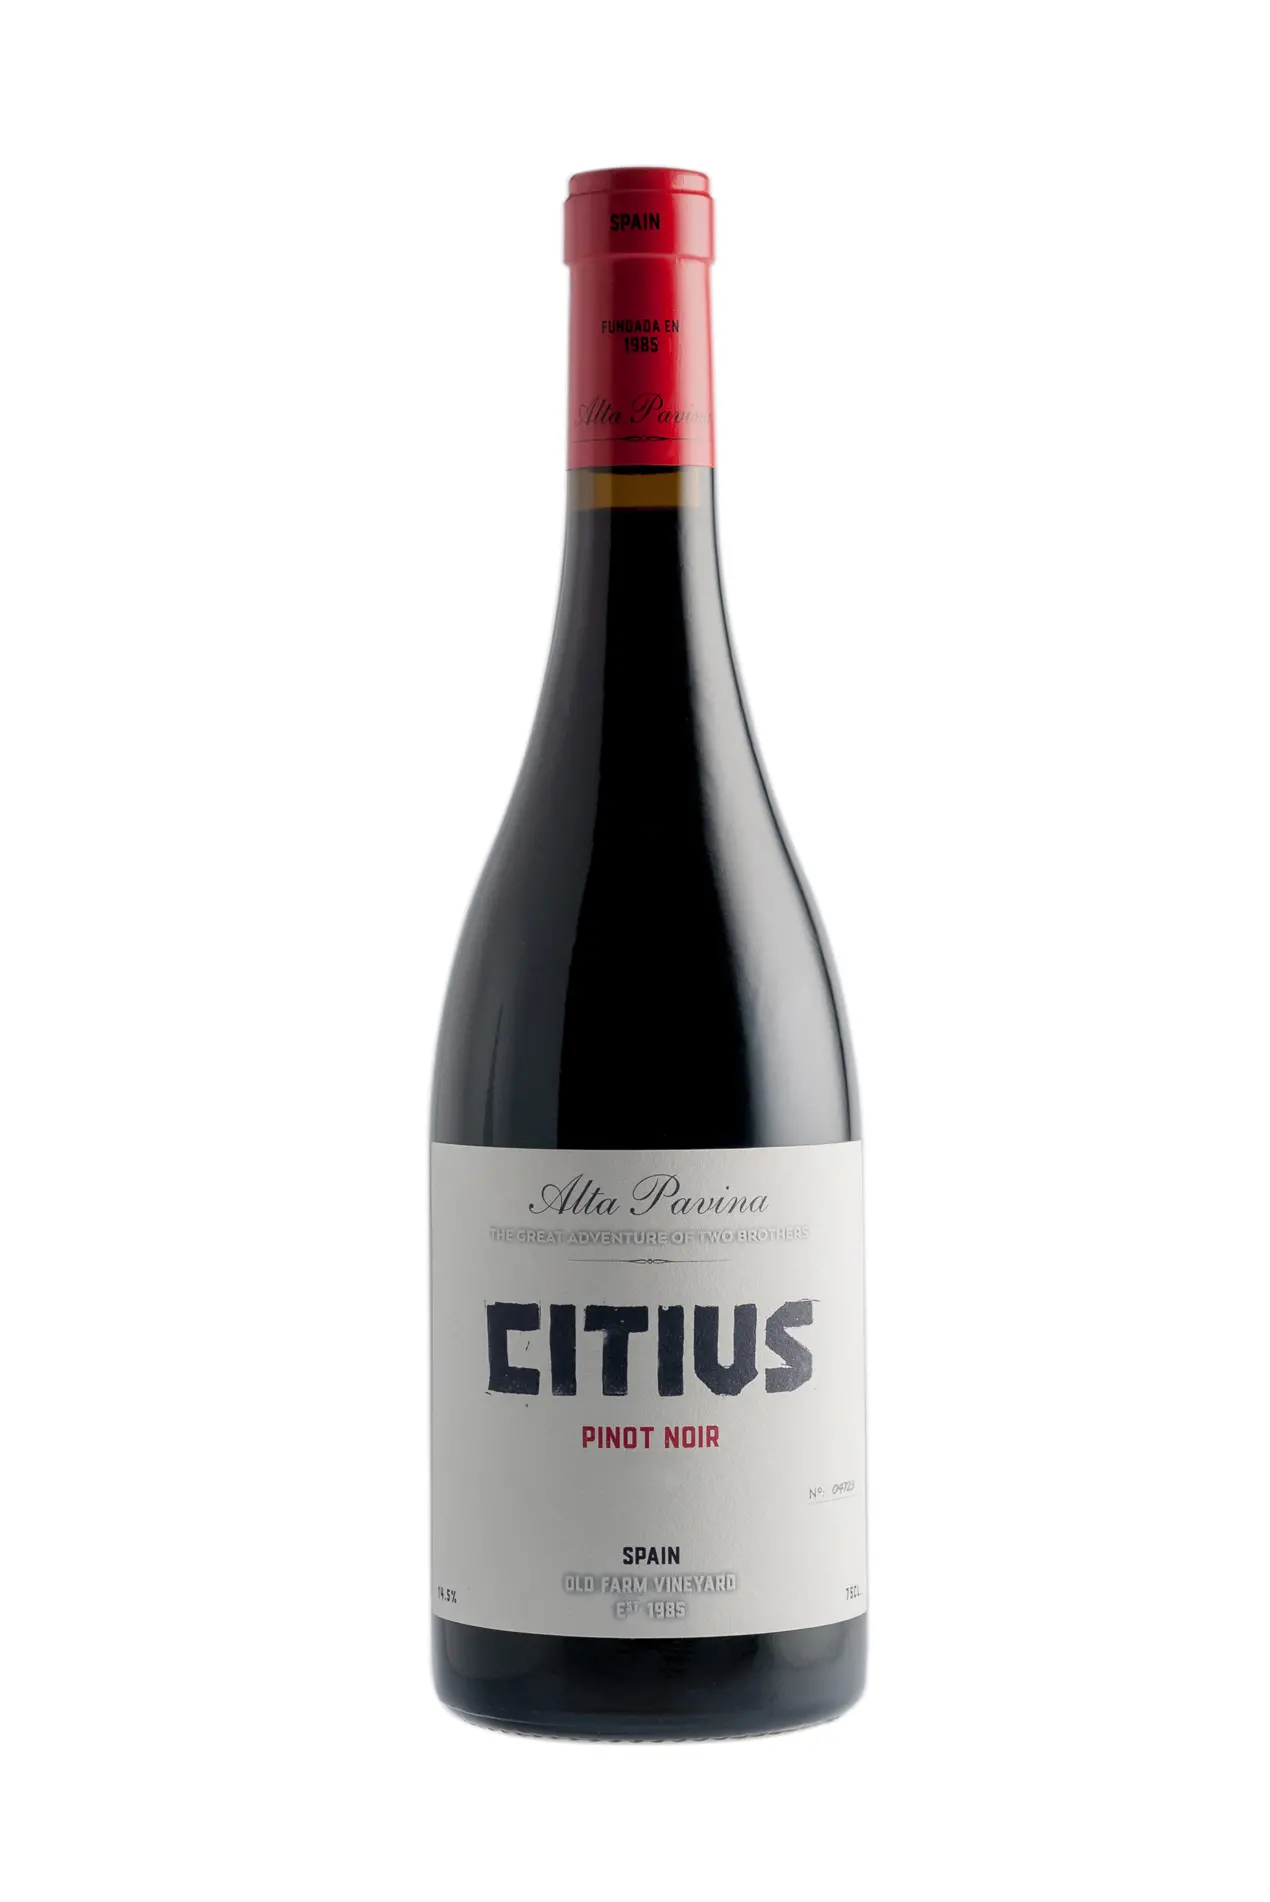 Great Wines From Spain citius.webp